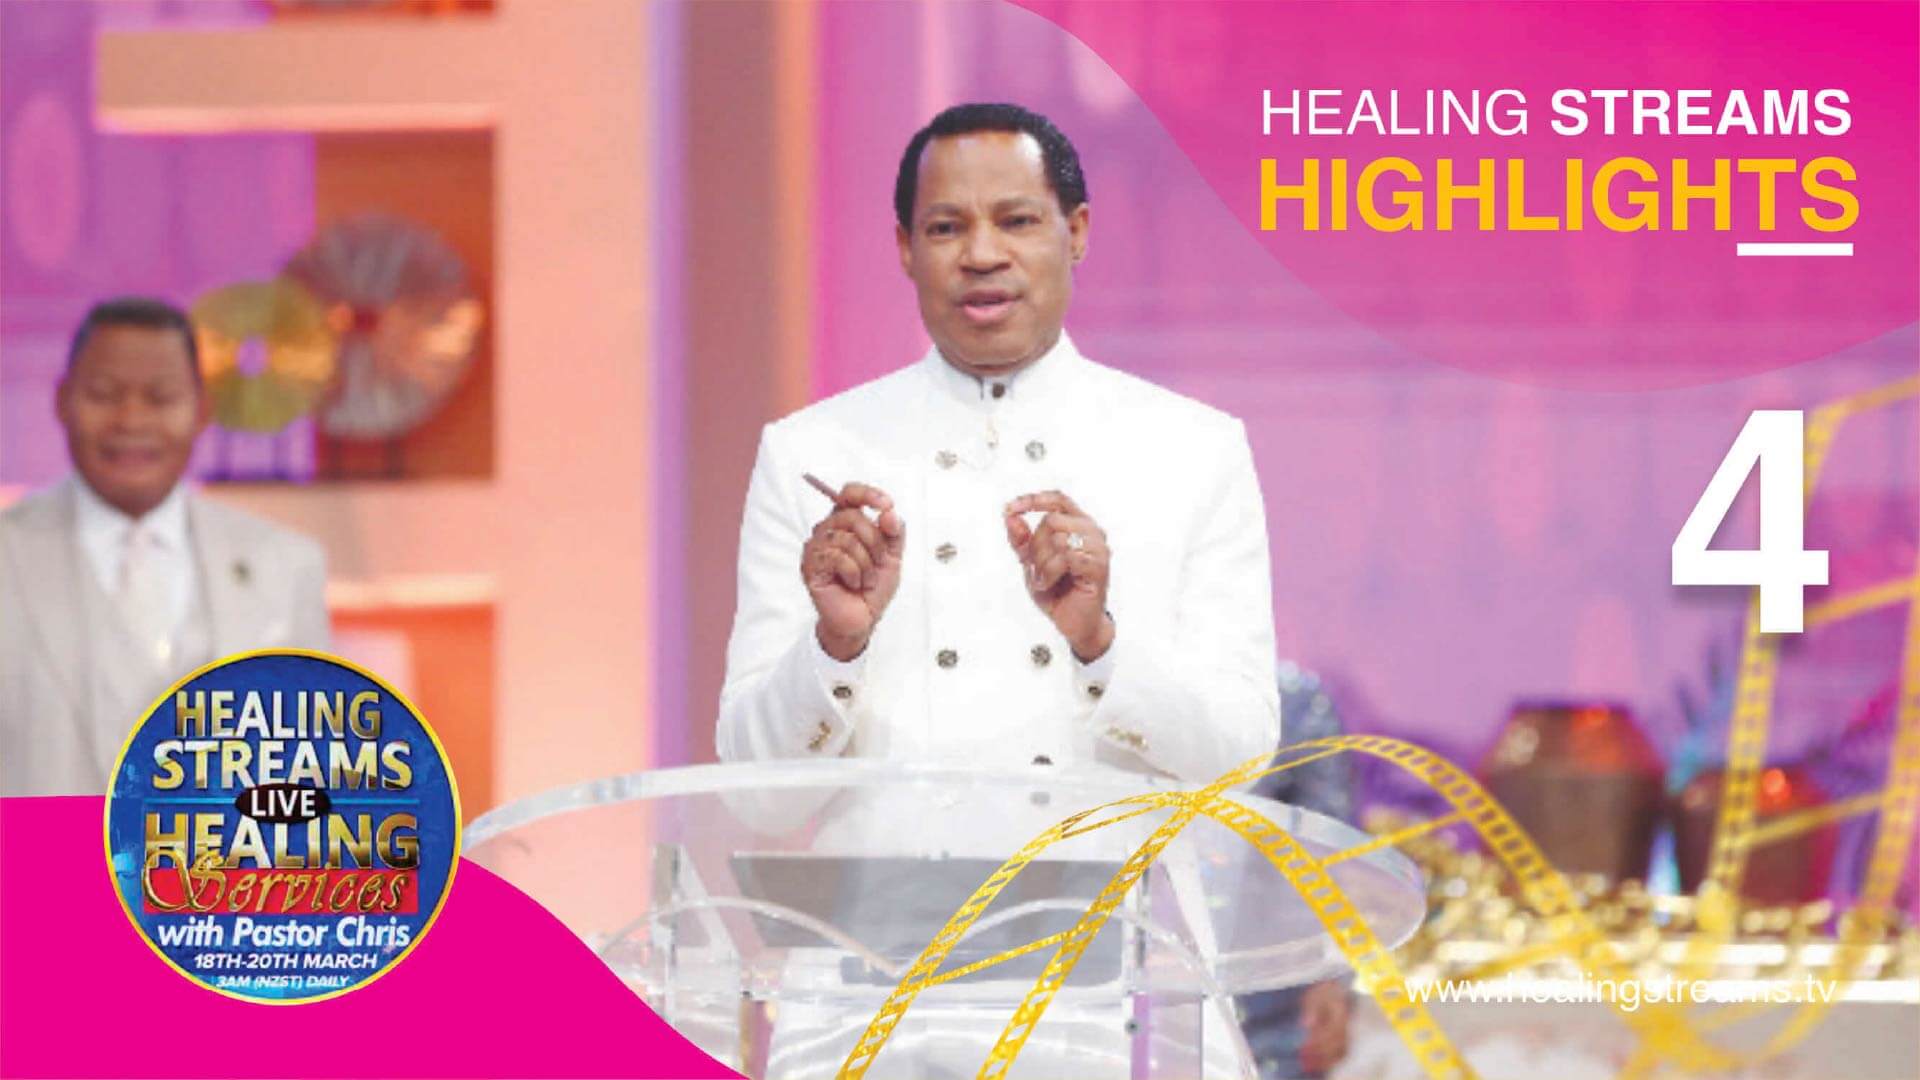 HEALING STREAMS LIVE HEALING SERVICES HIGHLIGHTS 4